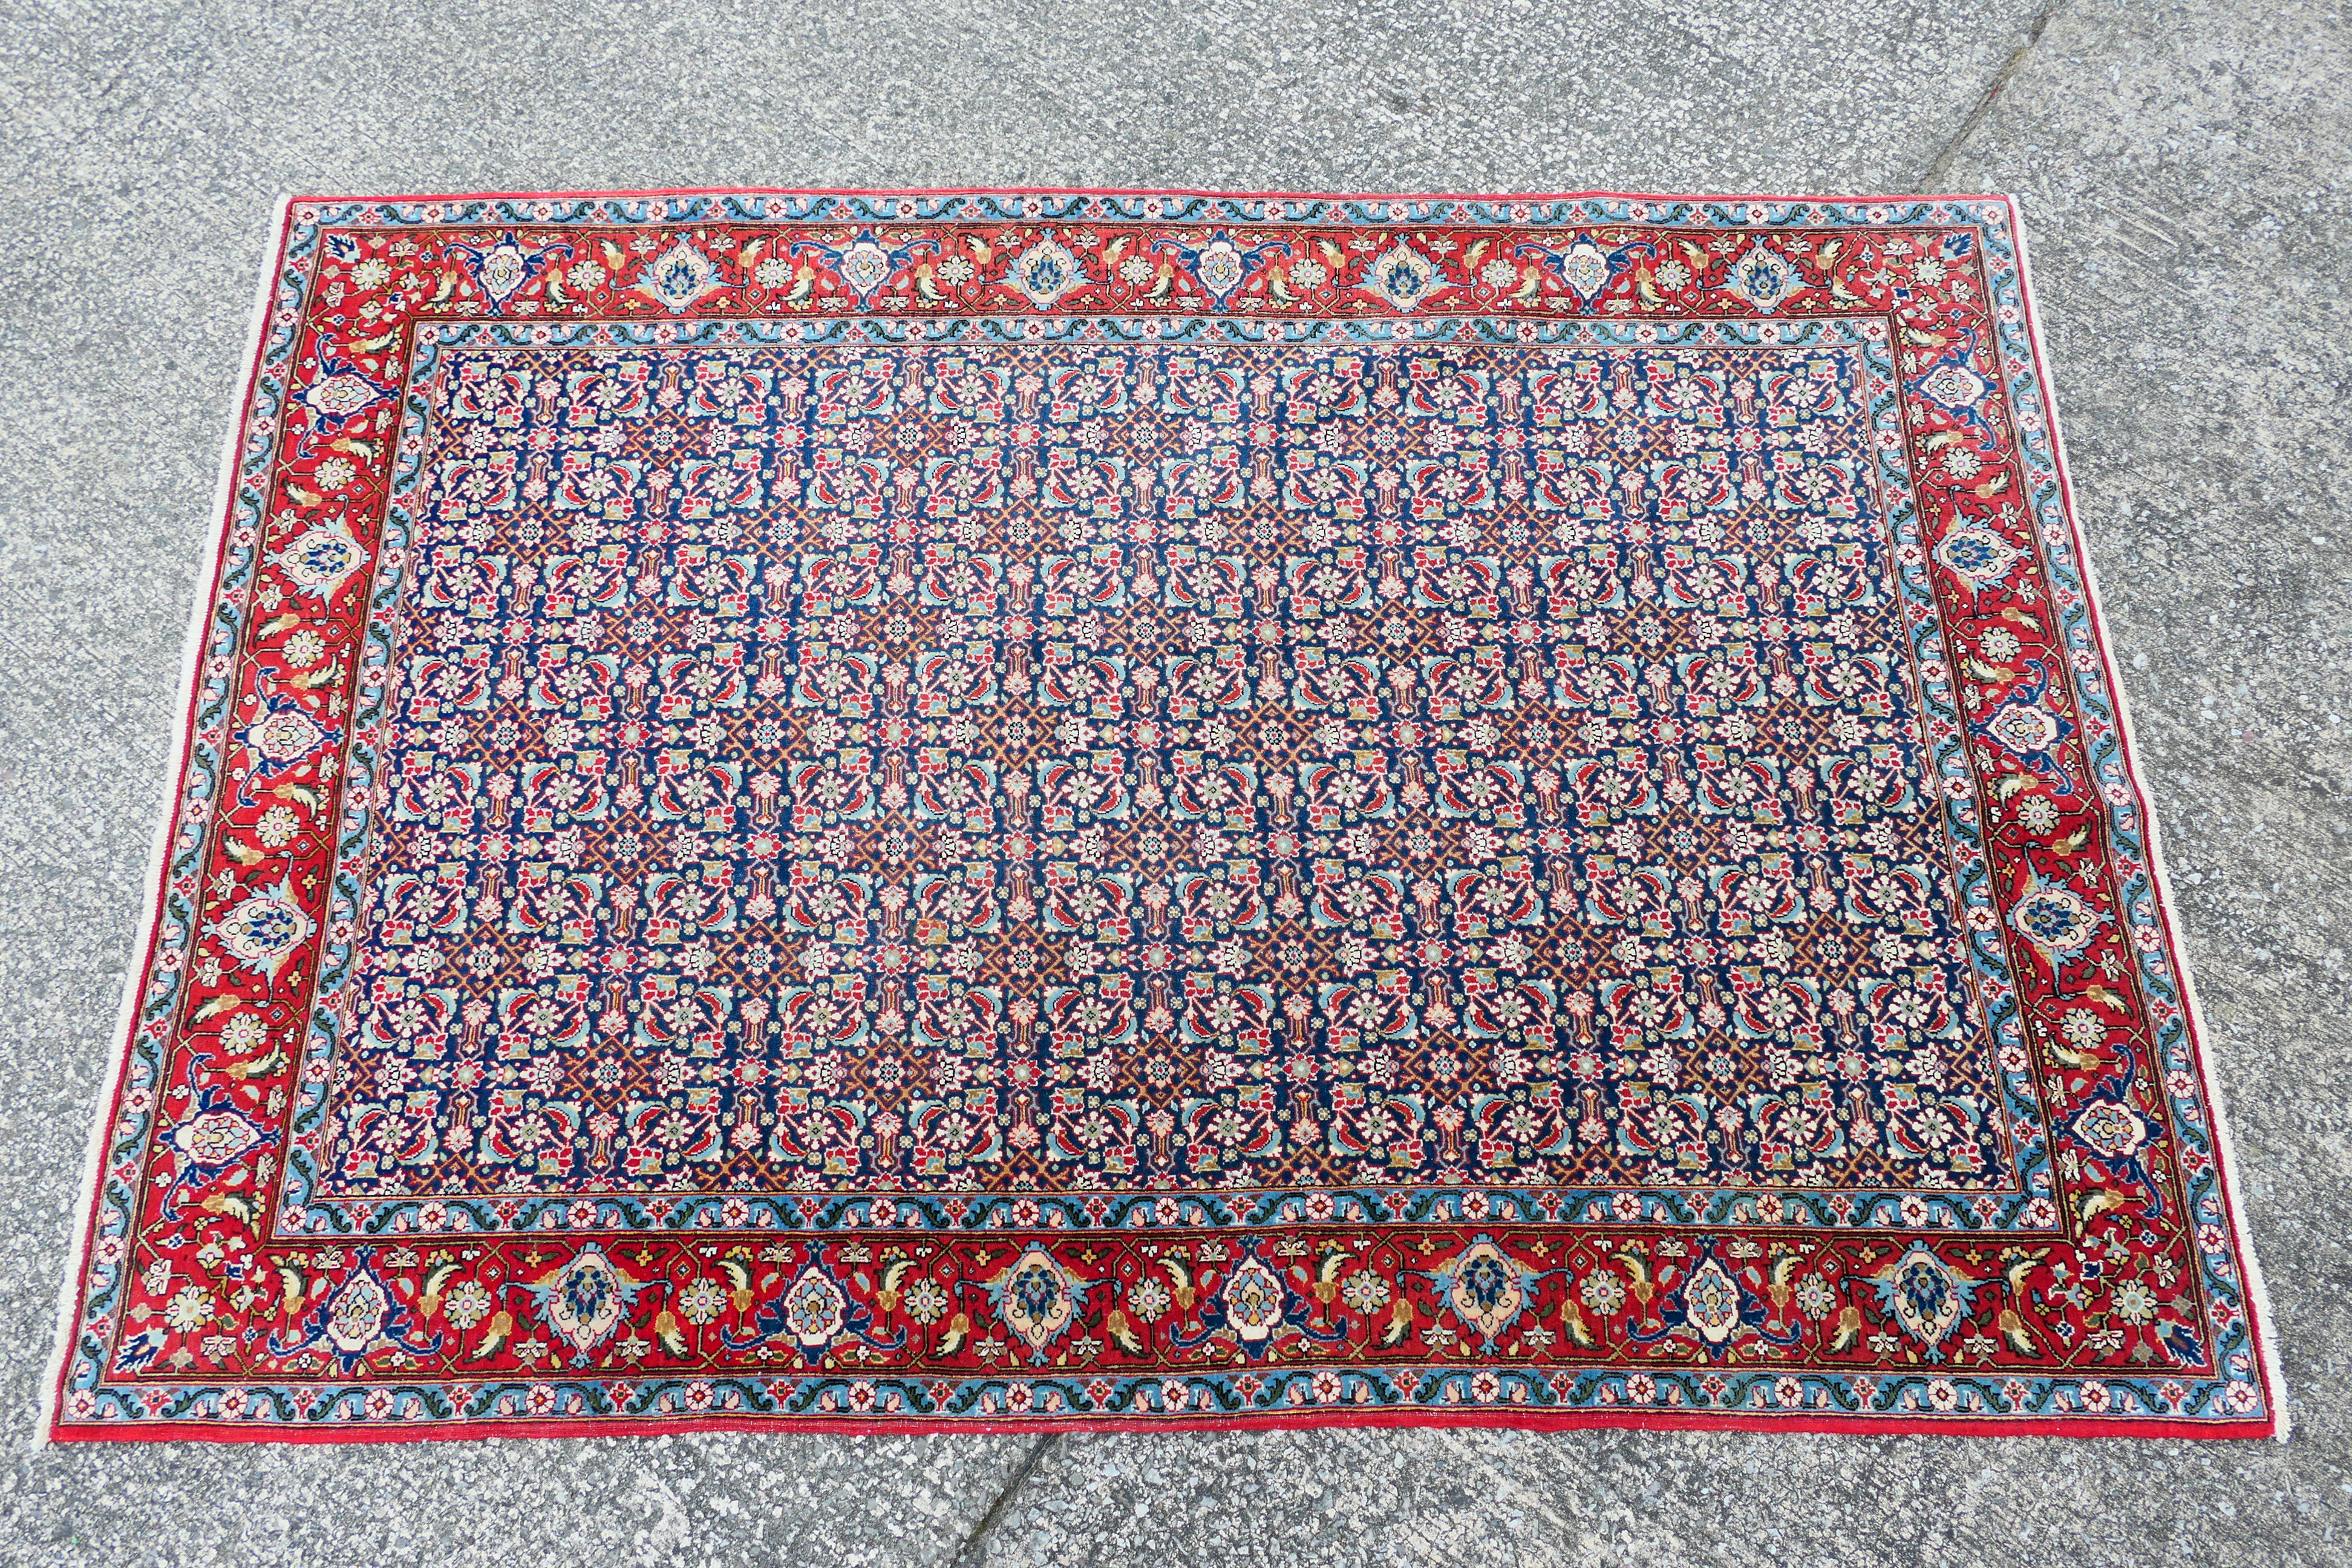 A Persian rug with central blue field with all over polychrome floral decoration within repeating